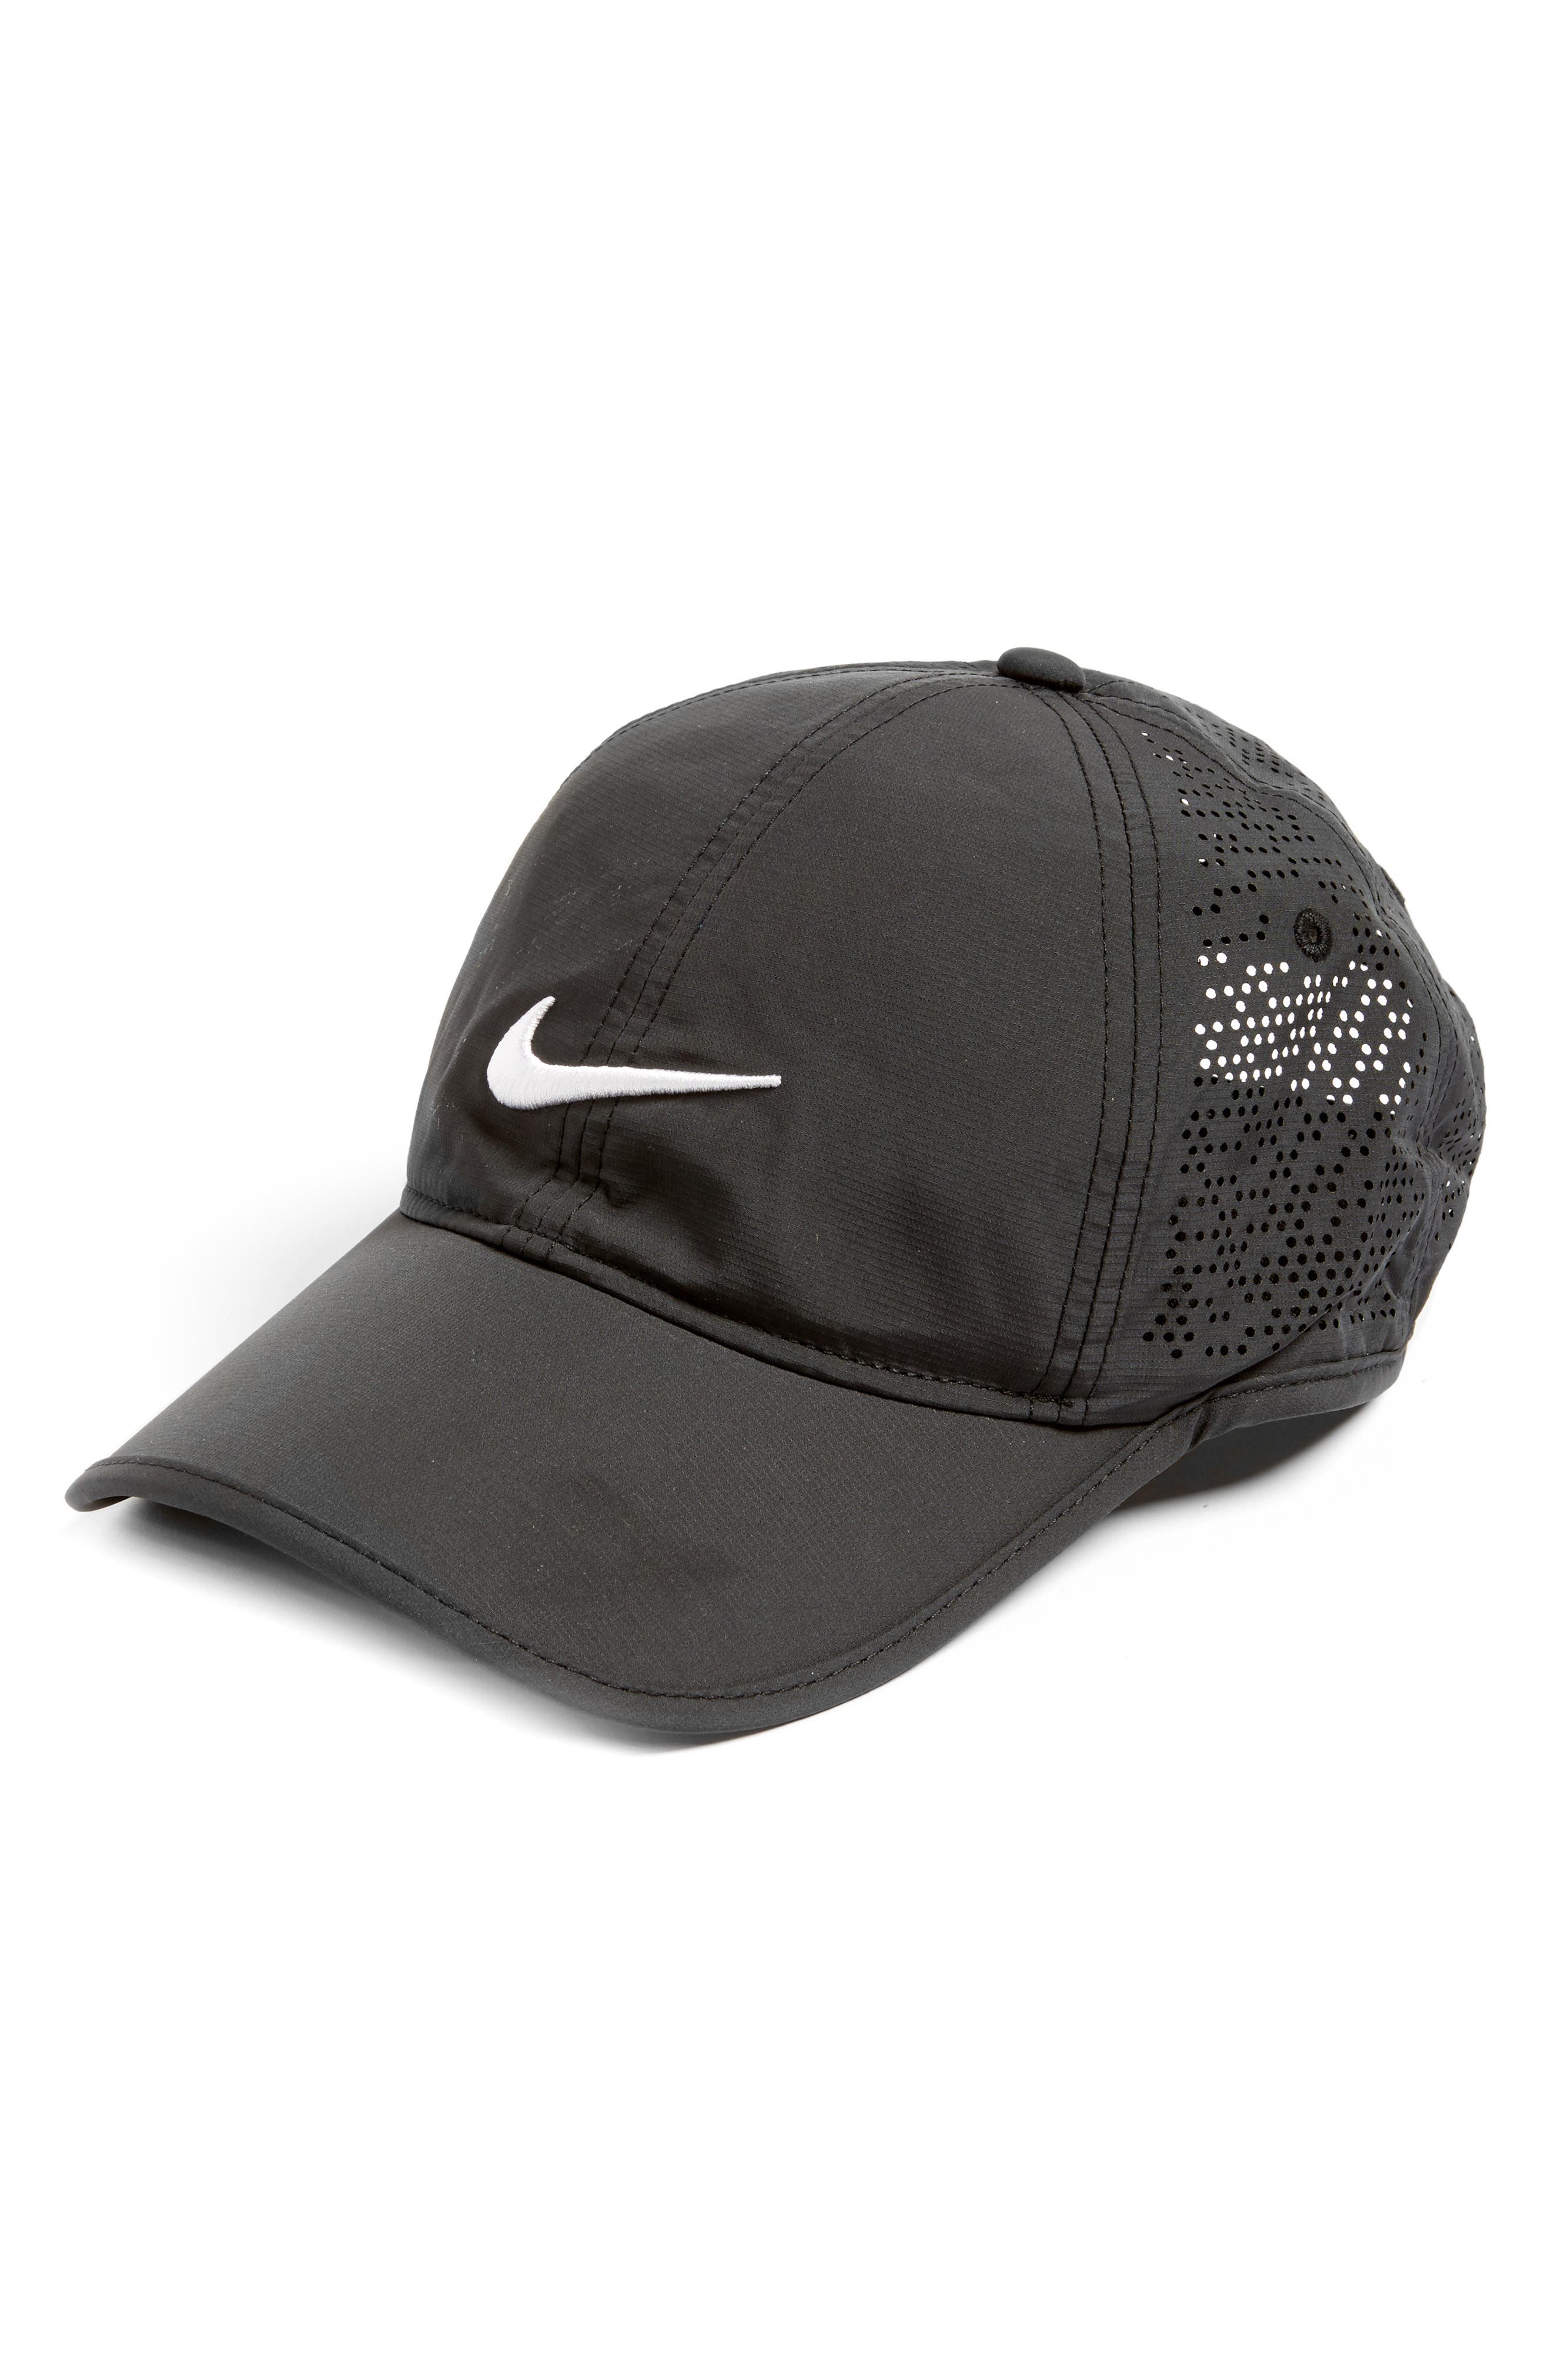 nike perforated hat